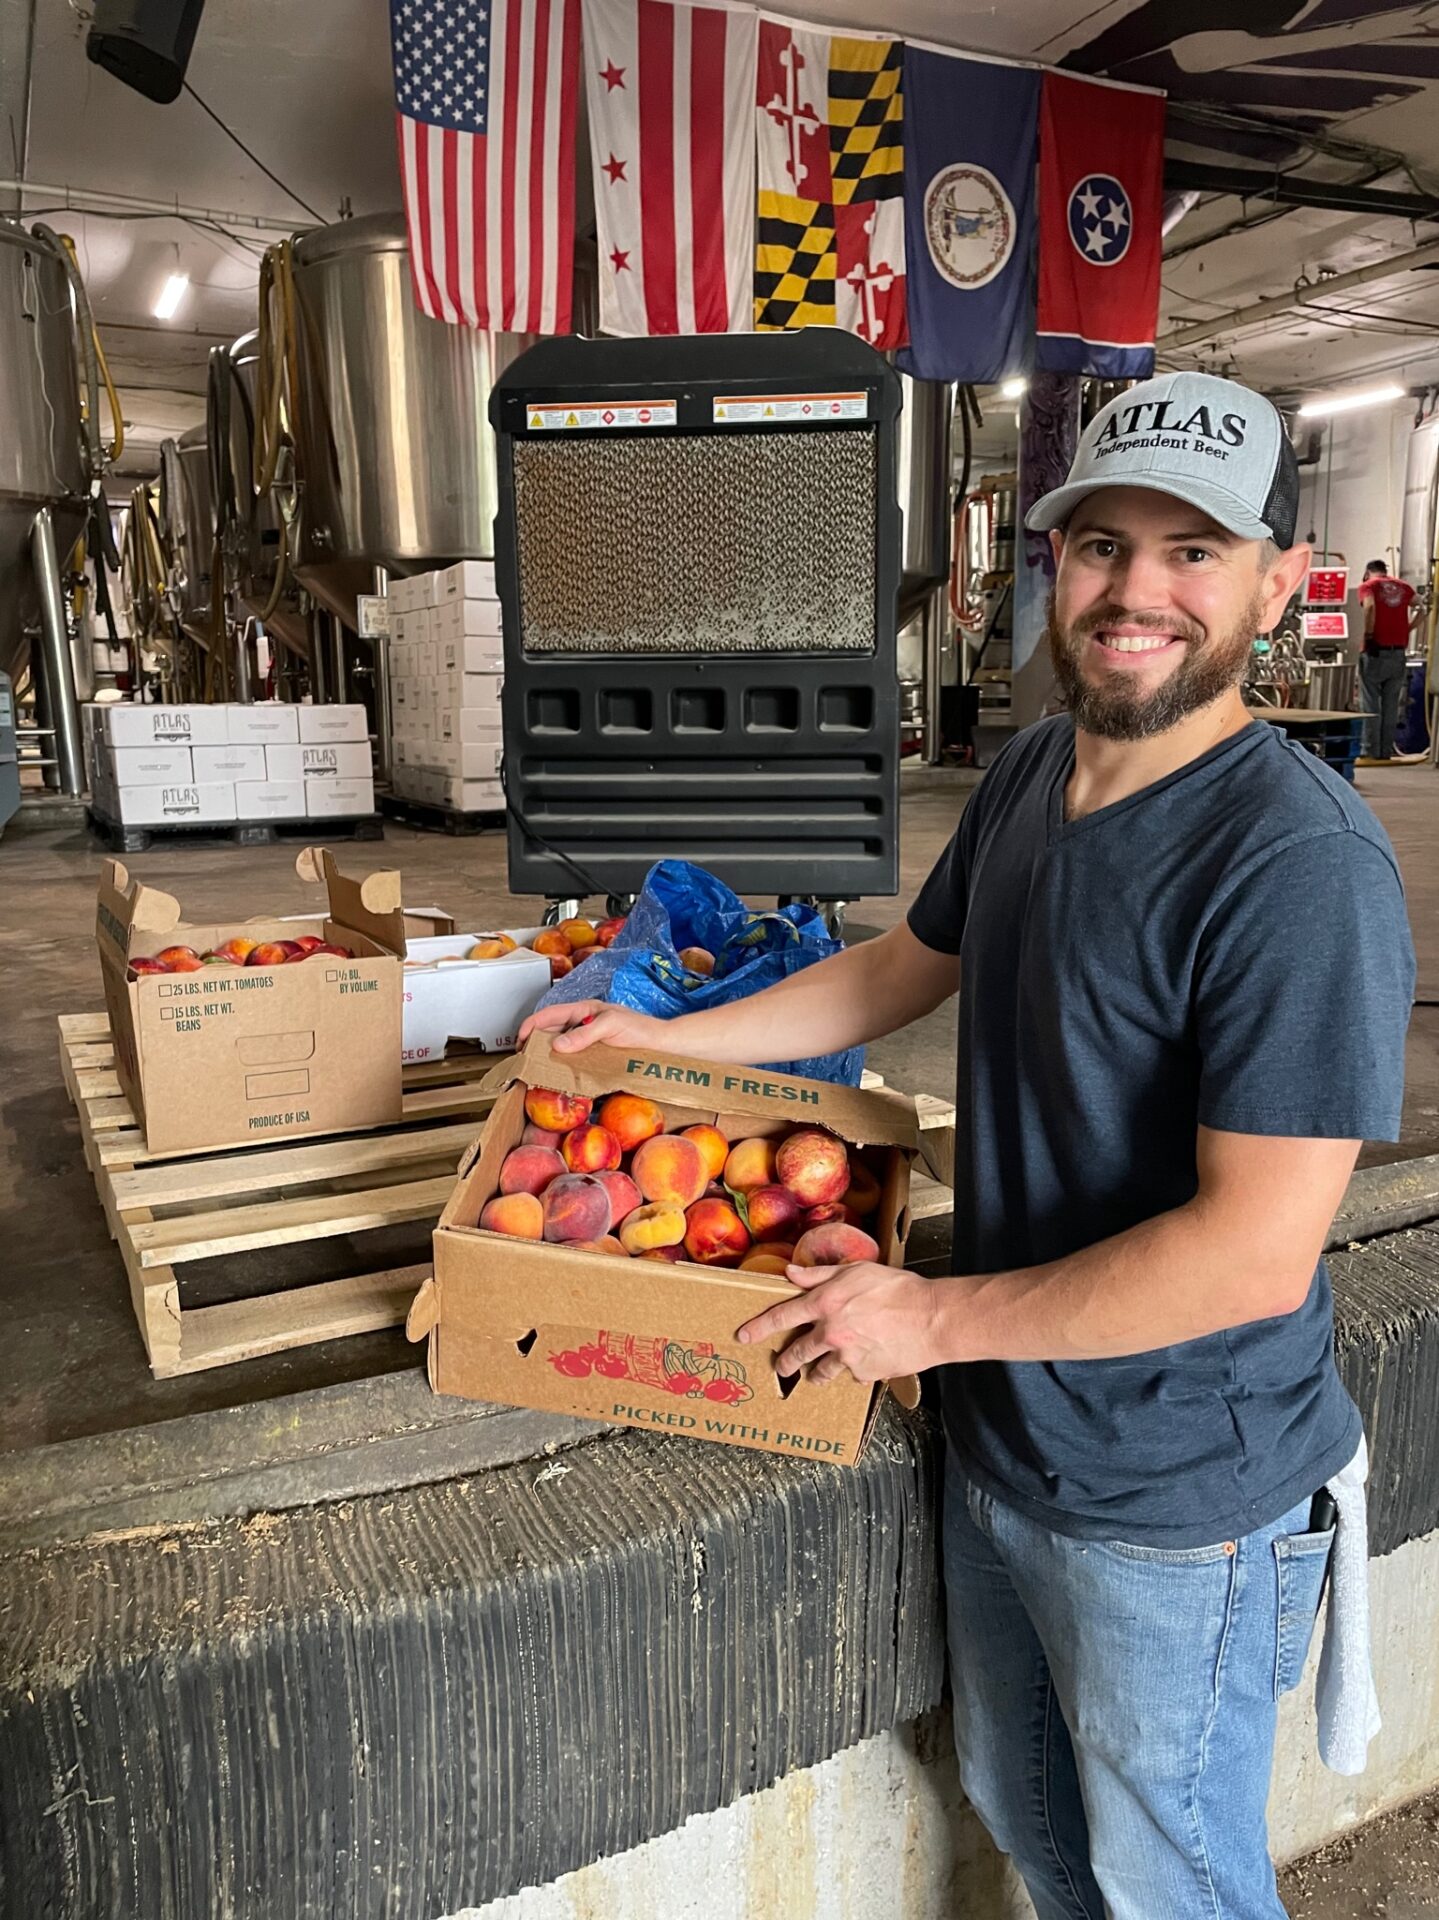 A Food Rescue US DC volunteer with a box of donated peaches